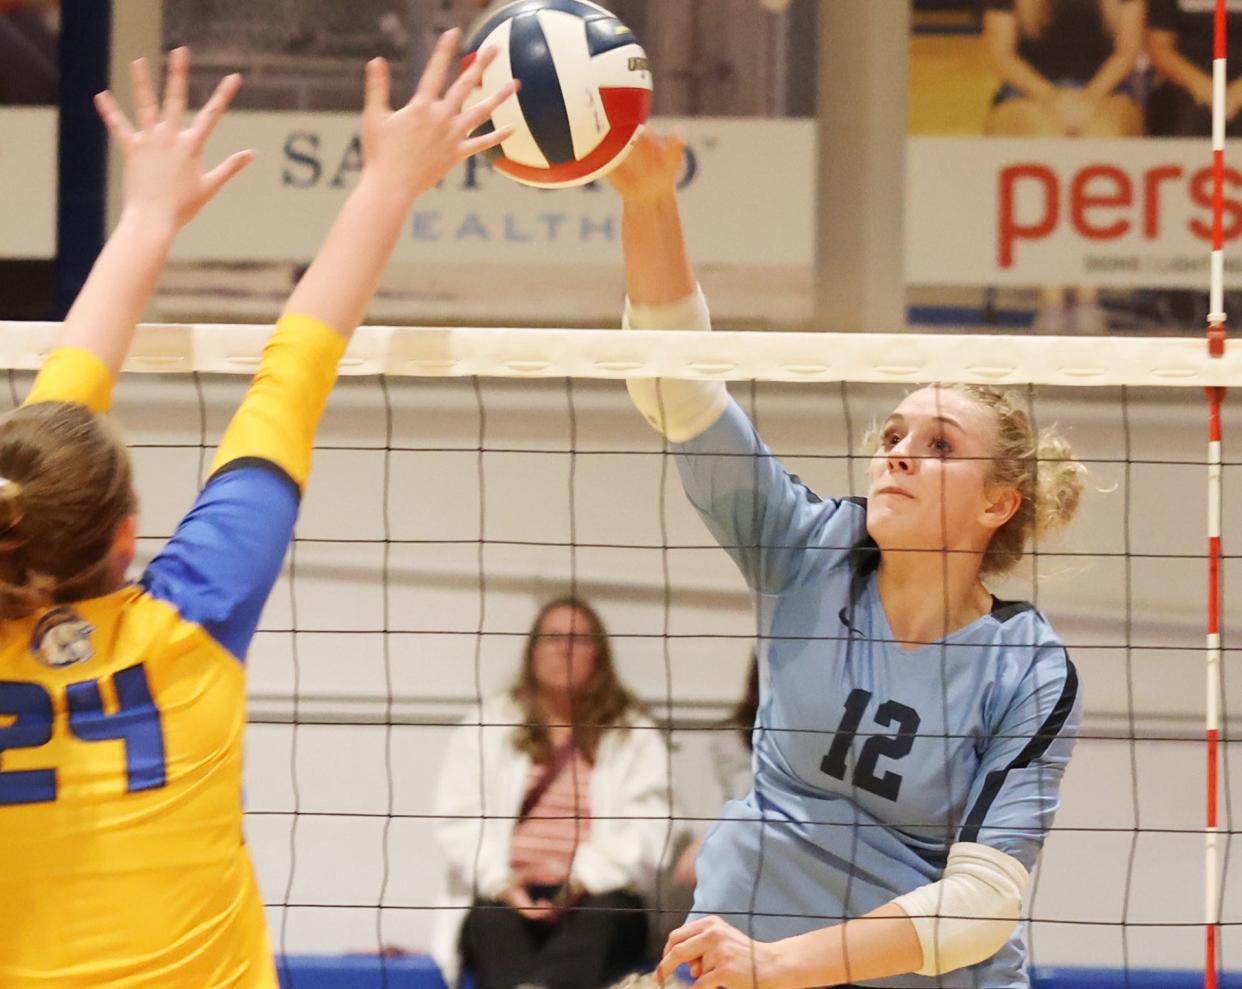 Dakota State 5-foot-8 junior outside hitter Sydney Schell has been named to the first team on the North Star Athletic Association's All-Conference volleyball team. Schell is from Aberdeen and played at Northwestern High School.